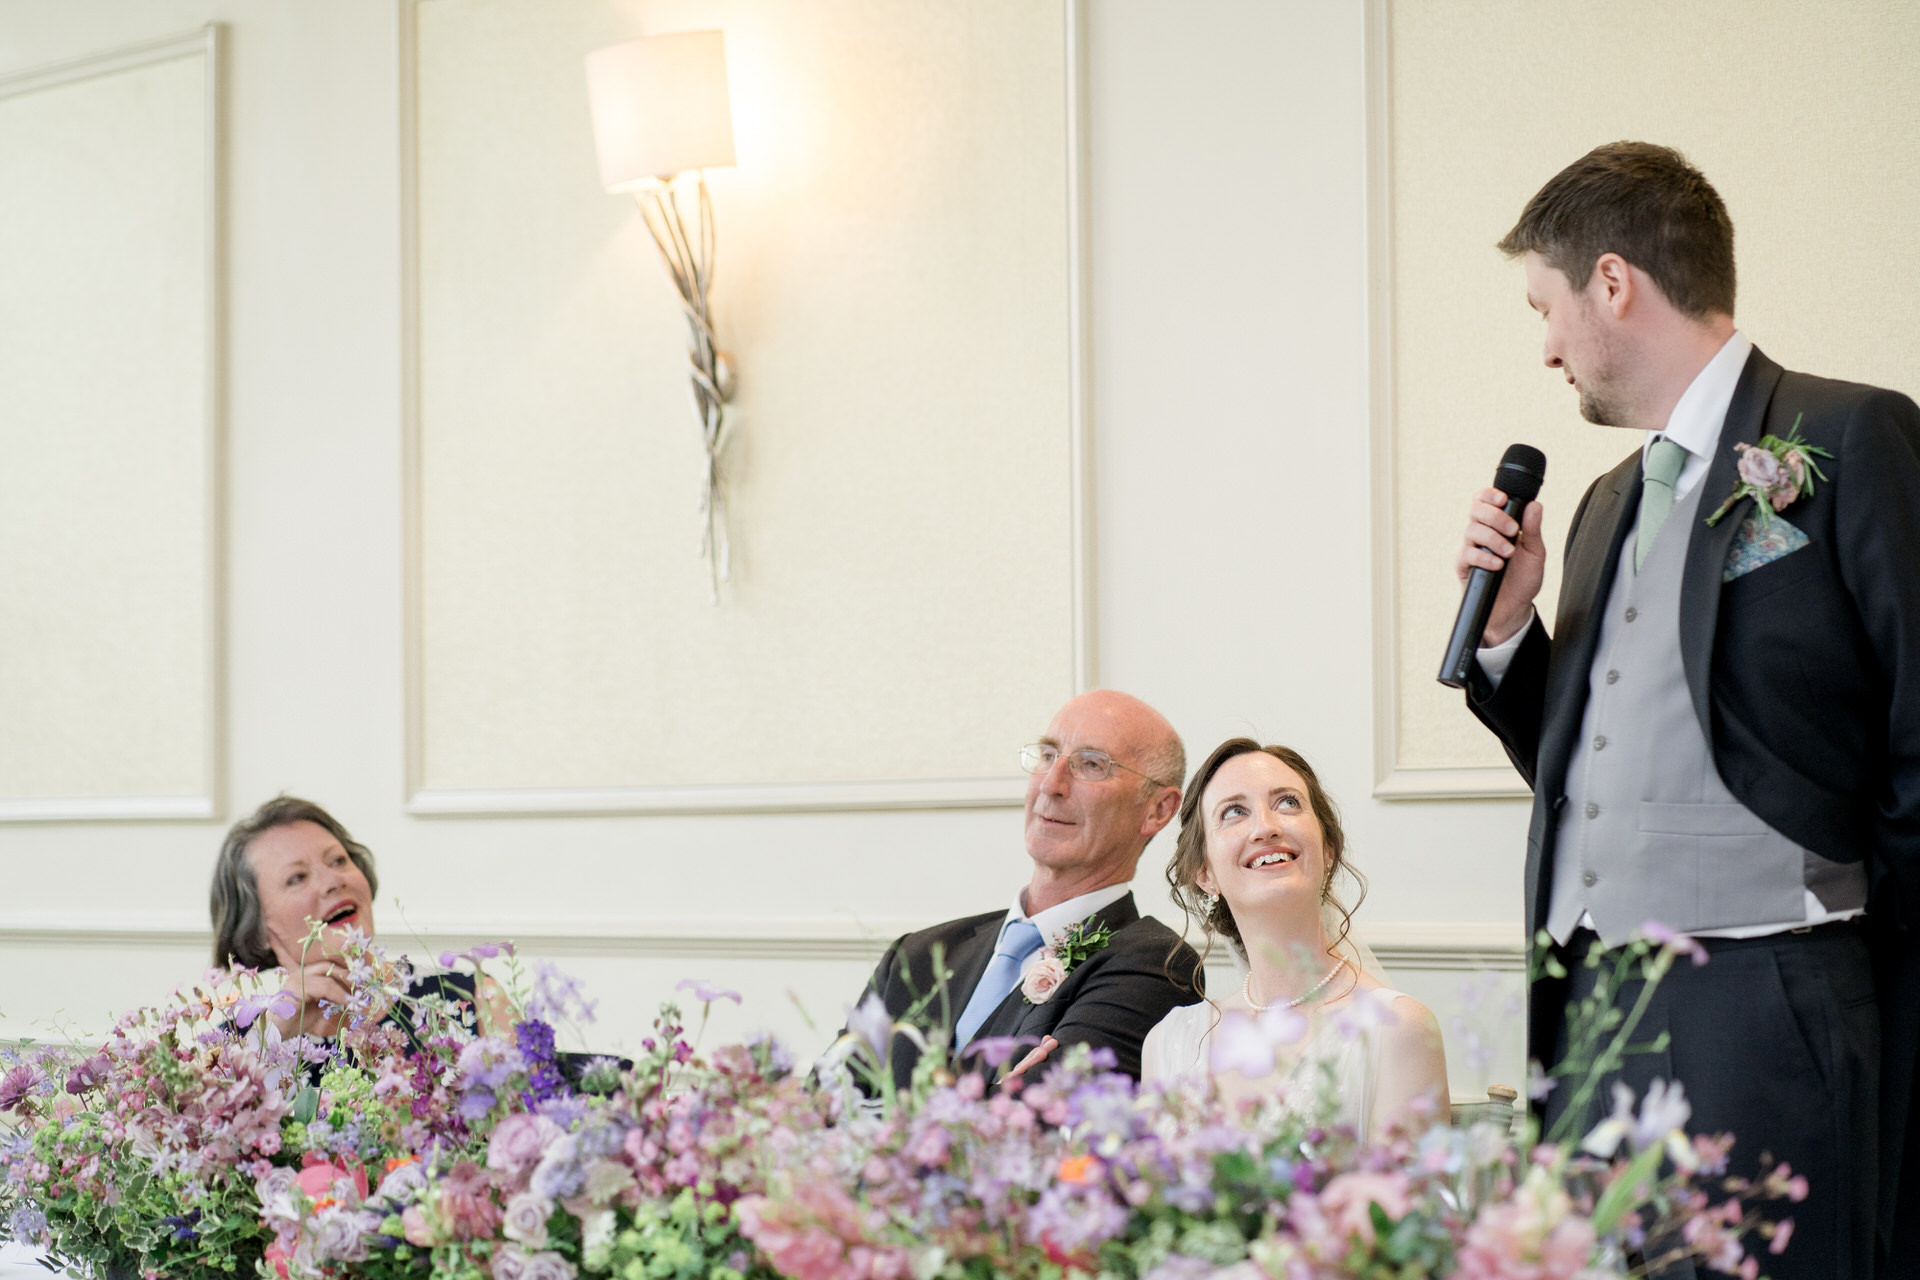 A Clifton Arms wedding with bright flowers. The groom gives his speech as the bride looks on.